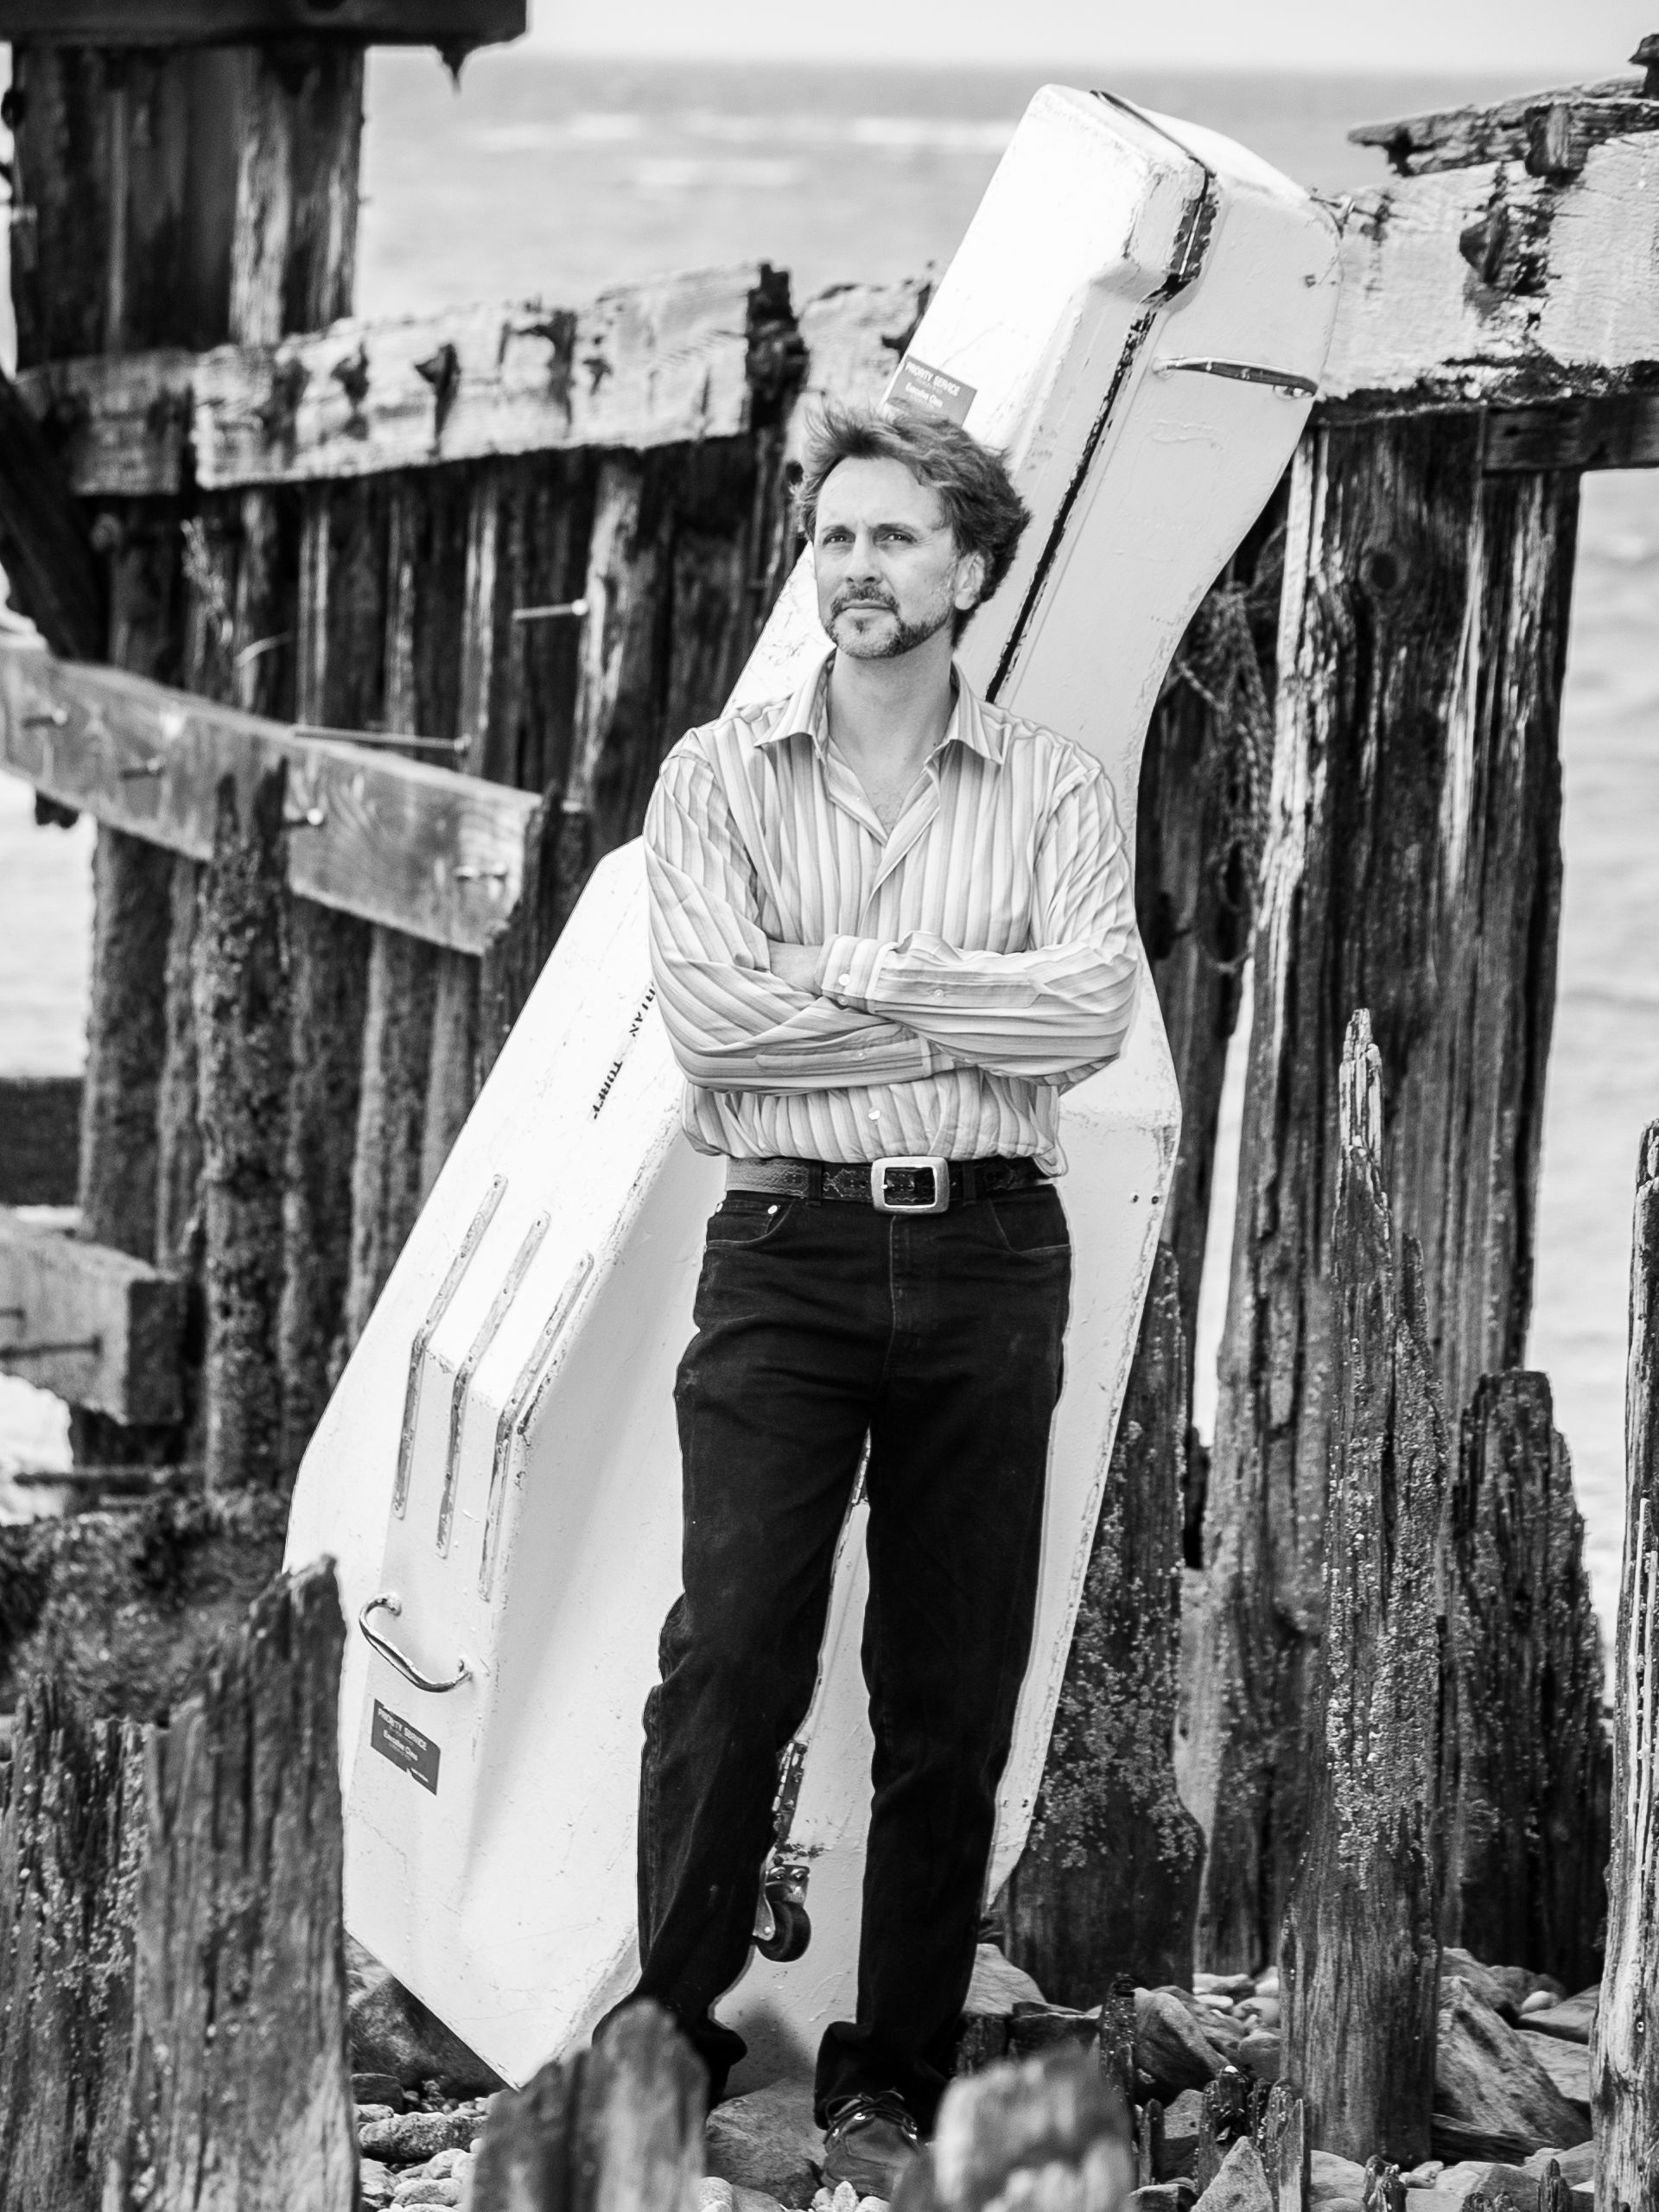 B&W portrait of cellist standing outside on pier with cello in shipping case